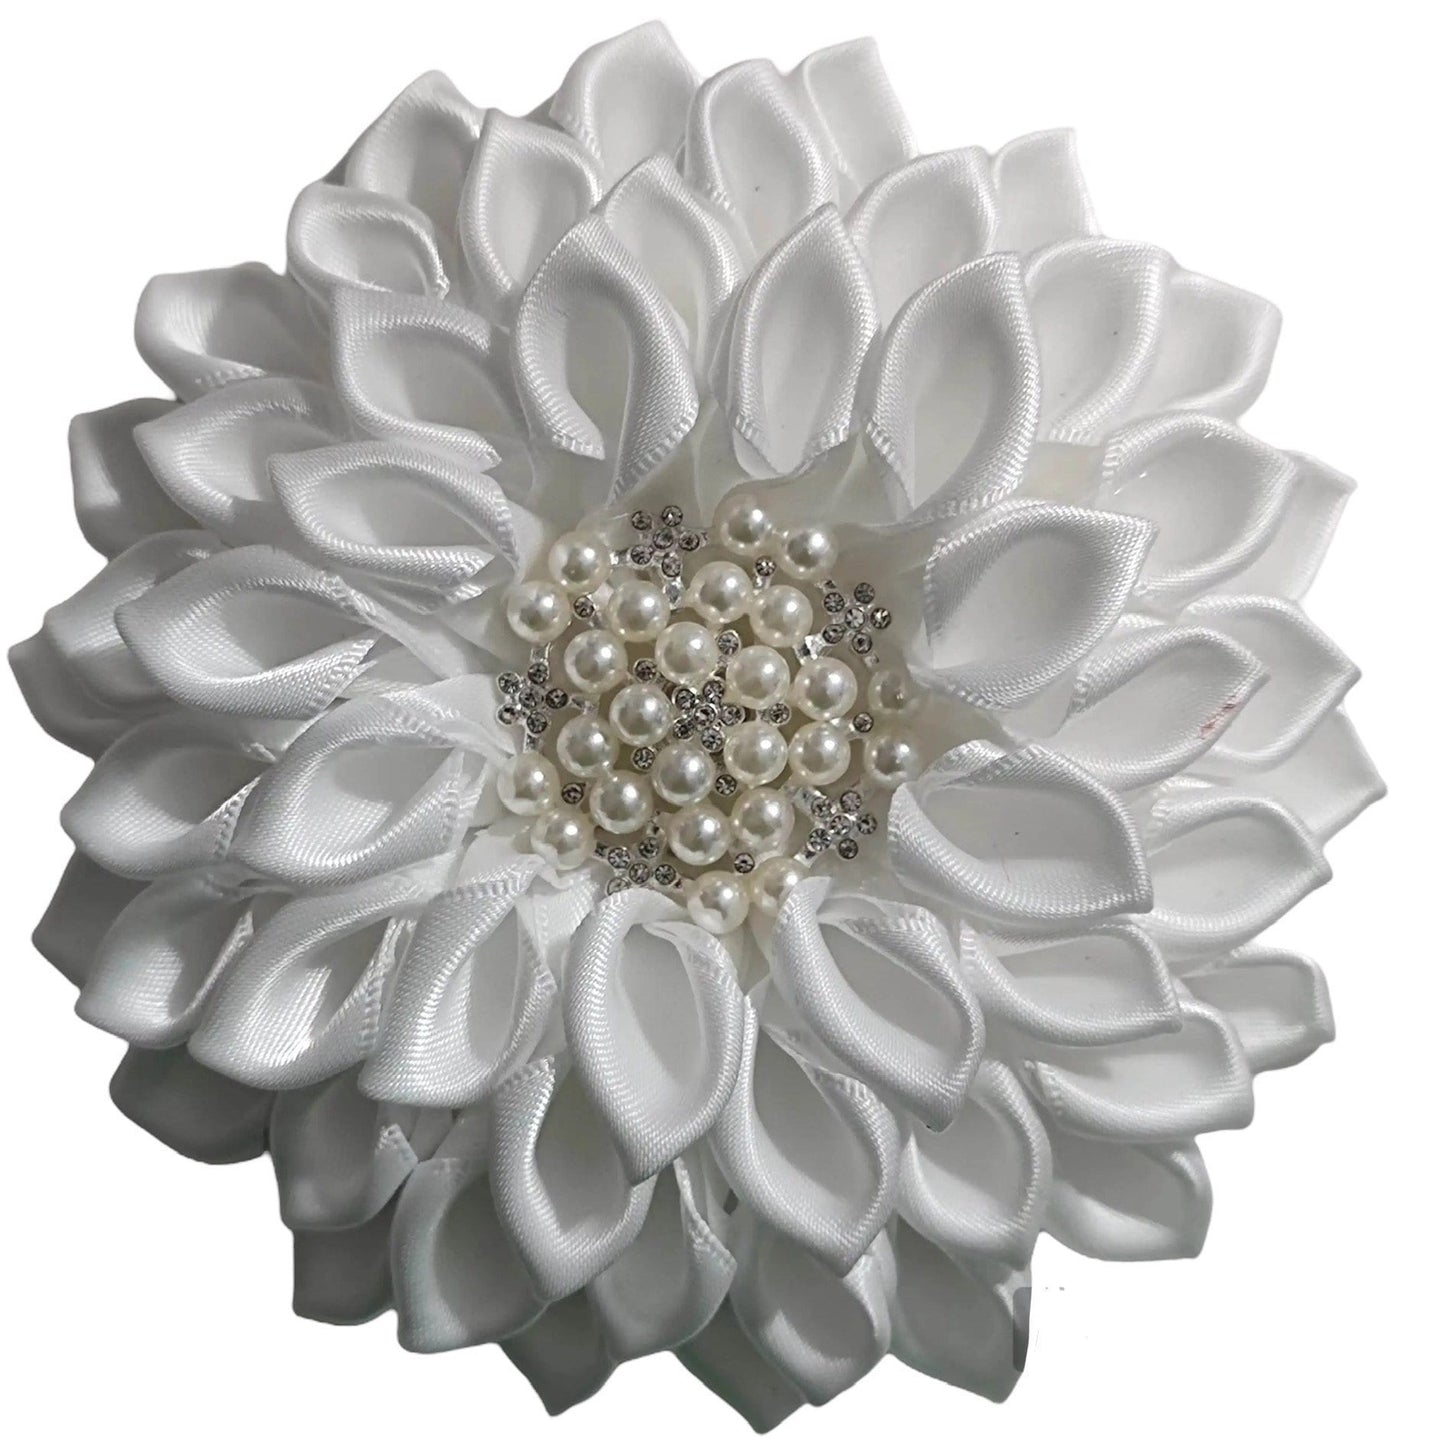 OES All white pearl design centerFlower Brooch,  Flower Corsage Broach Pin